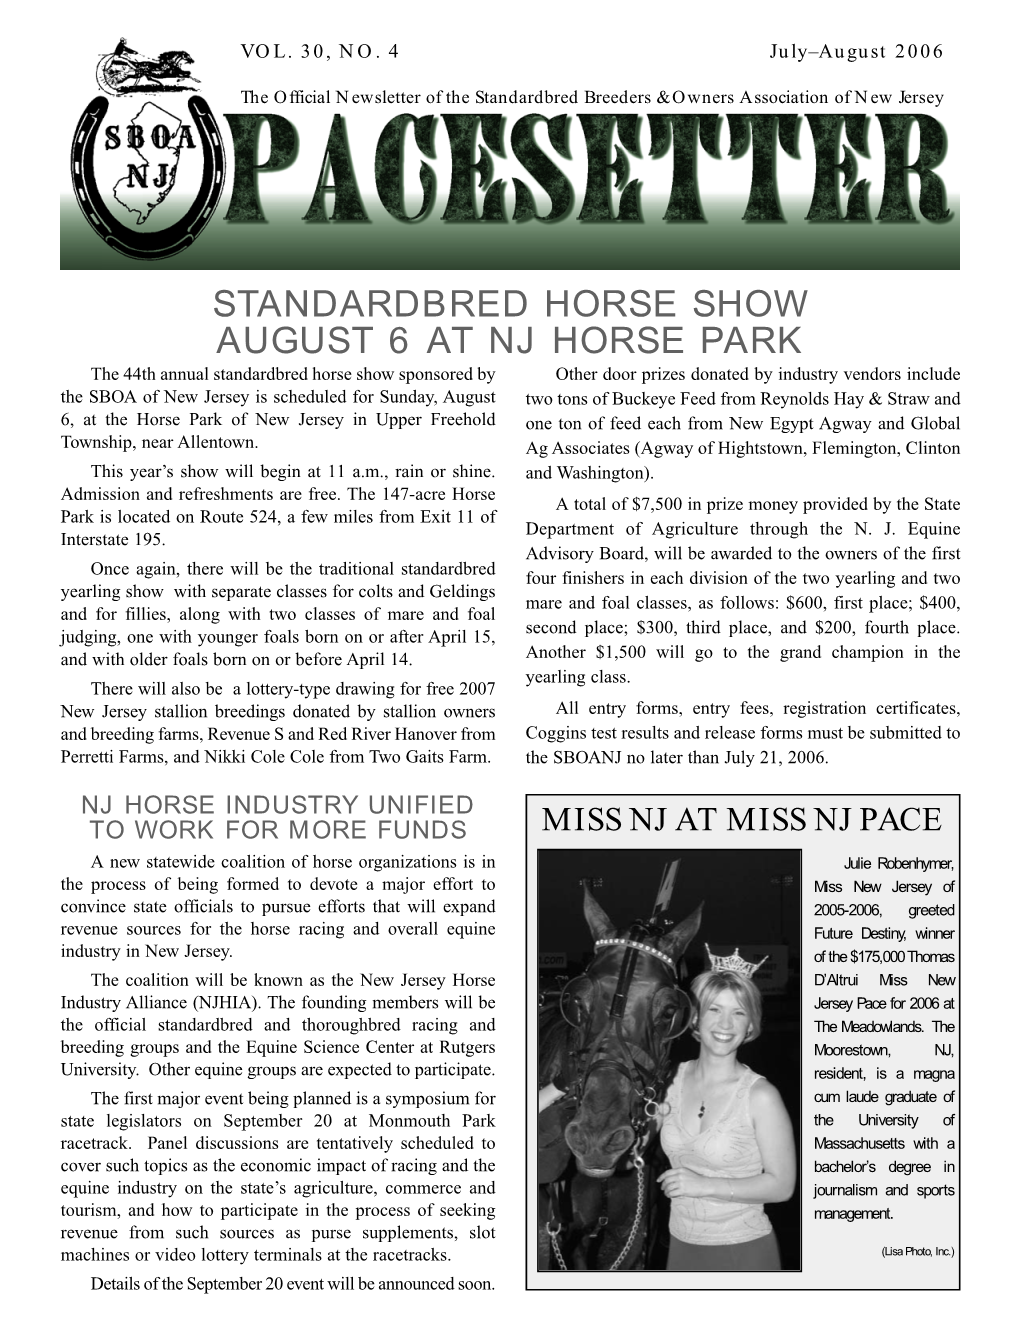 Standardbred Horse Show August 6 at Nj Horse Park